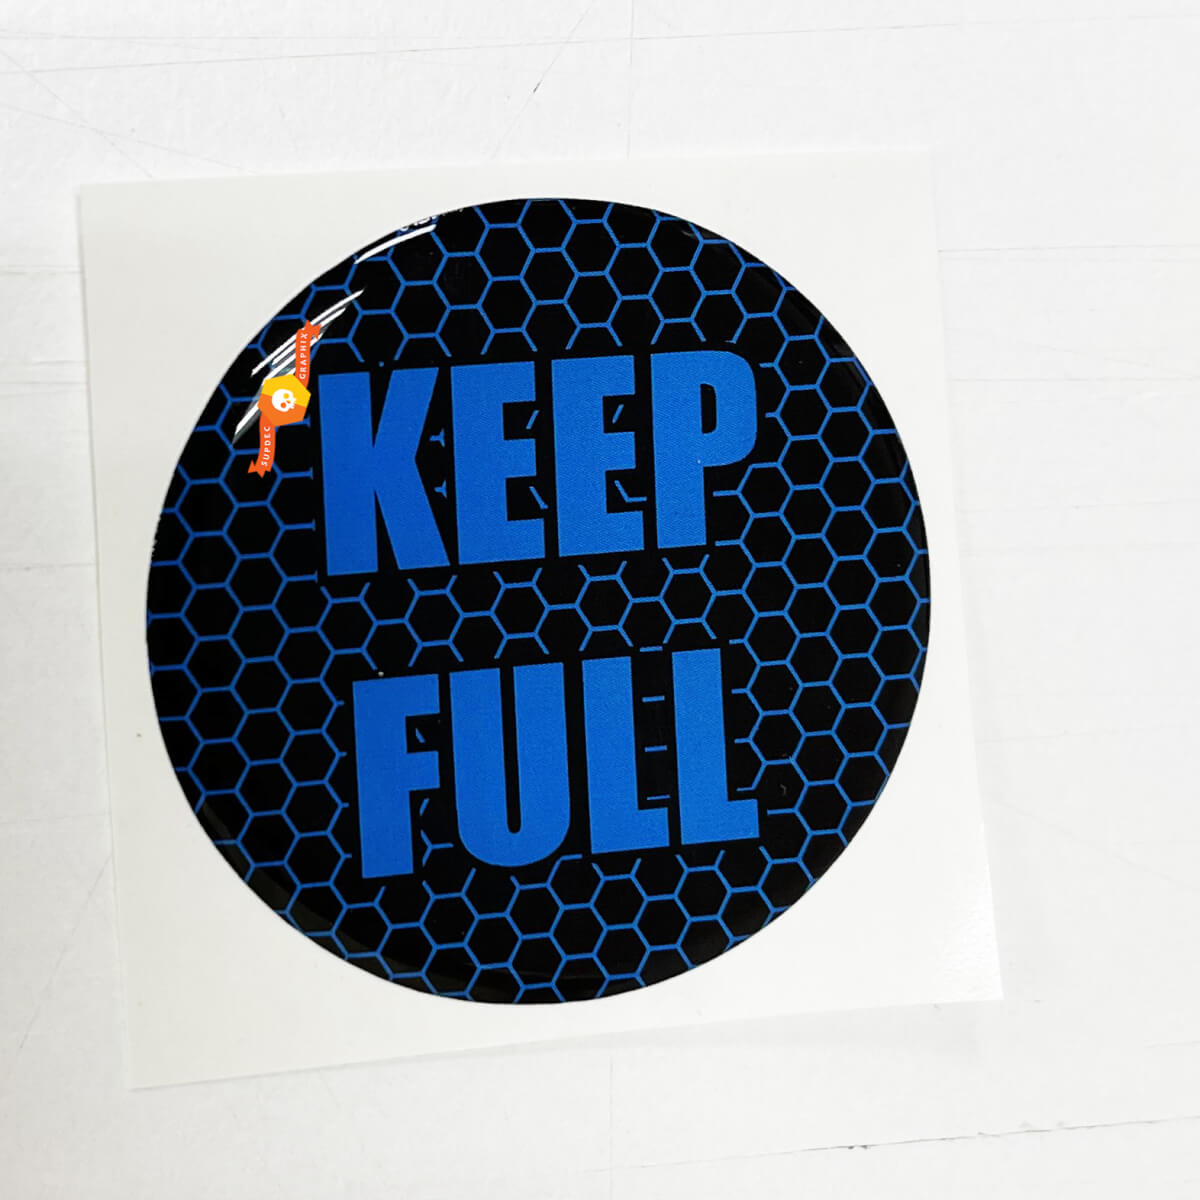 Keep Full Honeycomb Yellow Fuel Door Insert emblem domed decal for Challenger Dodge
